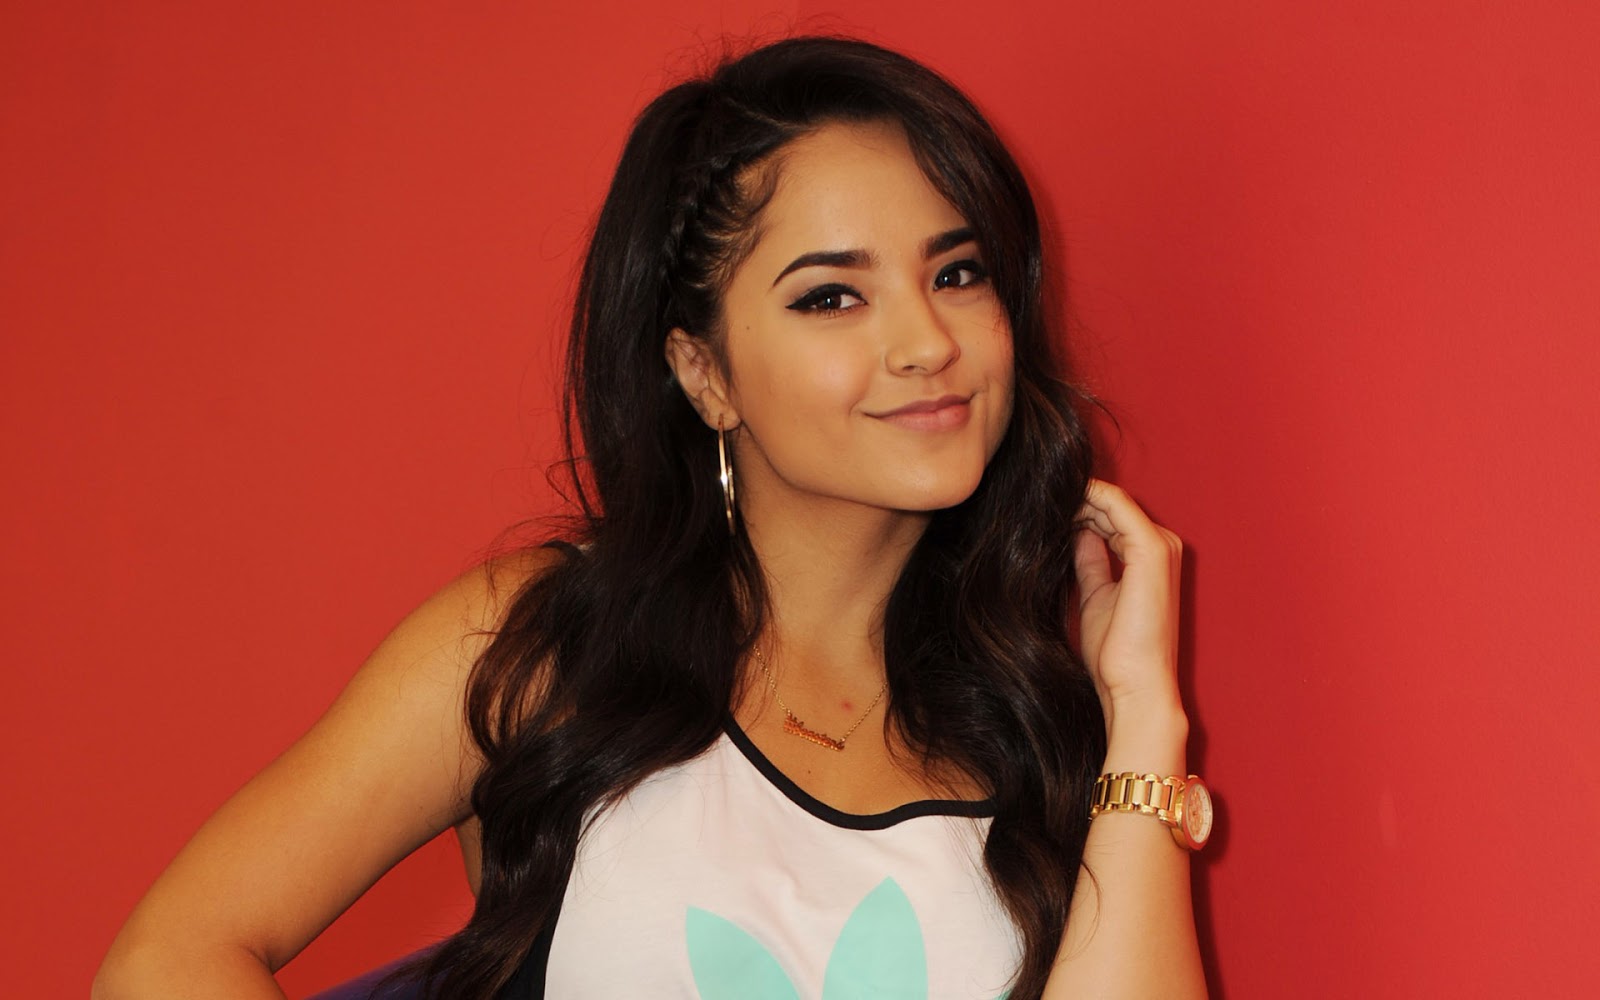 Becky G Upcoming Movies 2016 'Power Rangers' Find on wikipedia, imdb, Facebook, Twitter, Google Plus